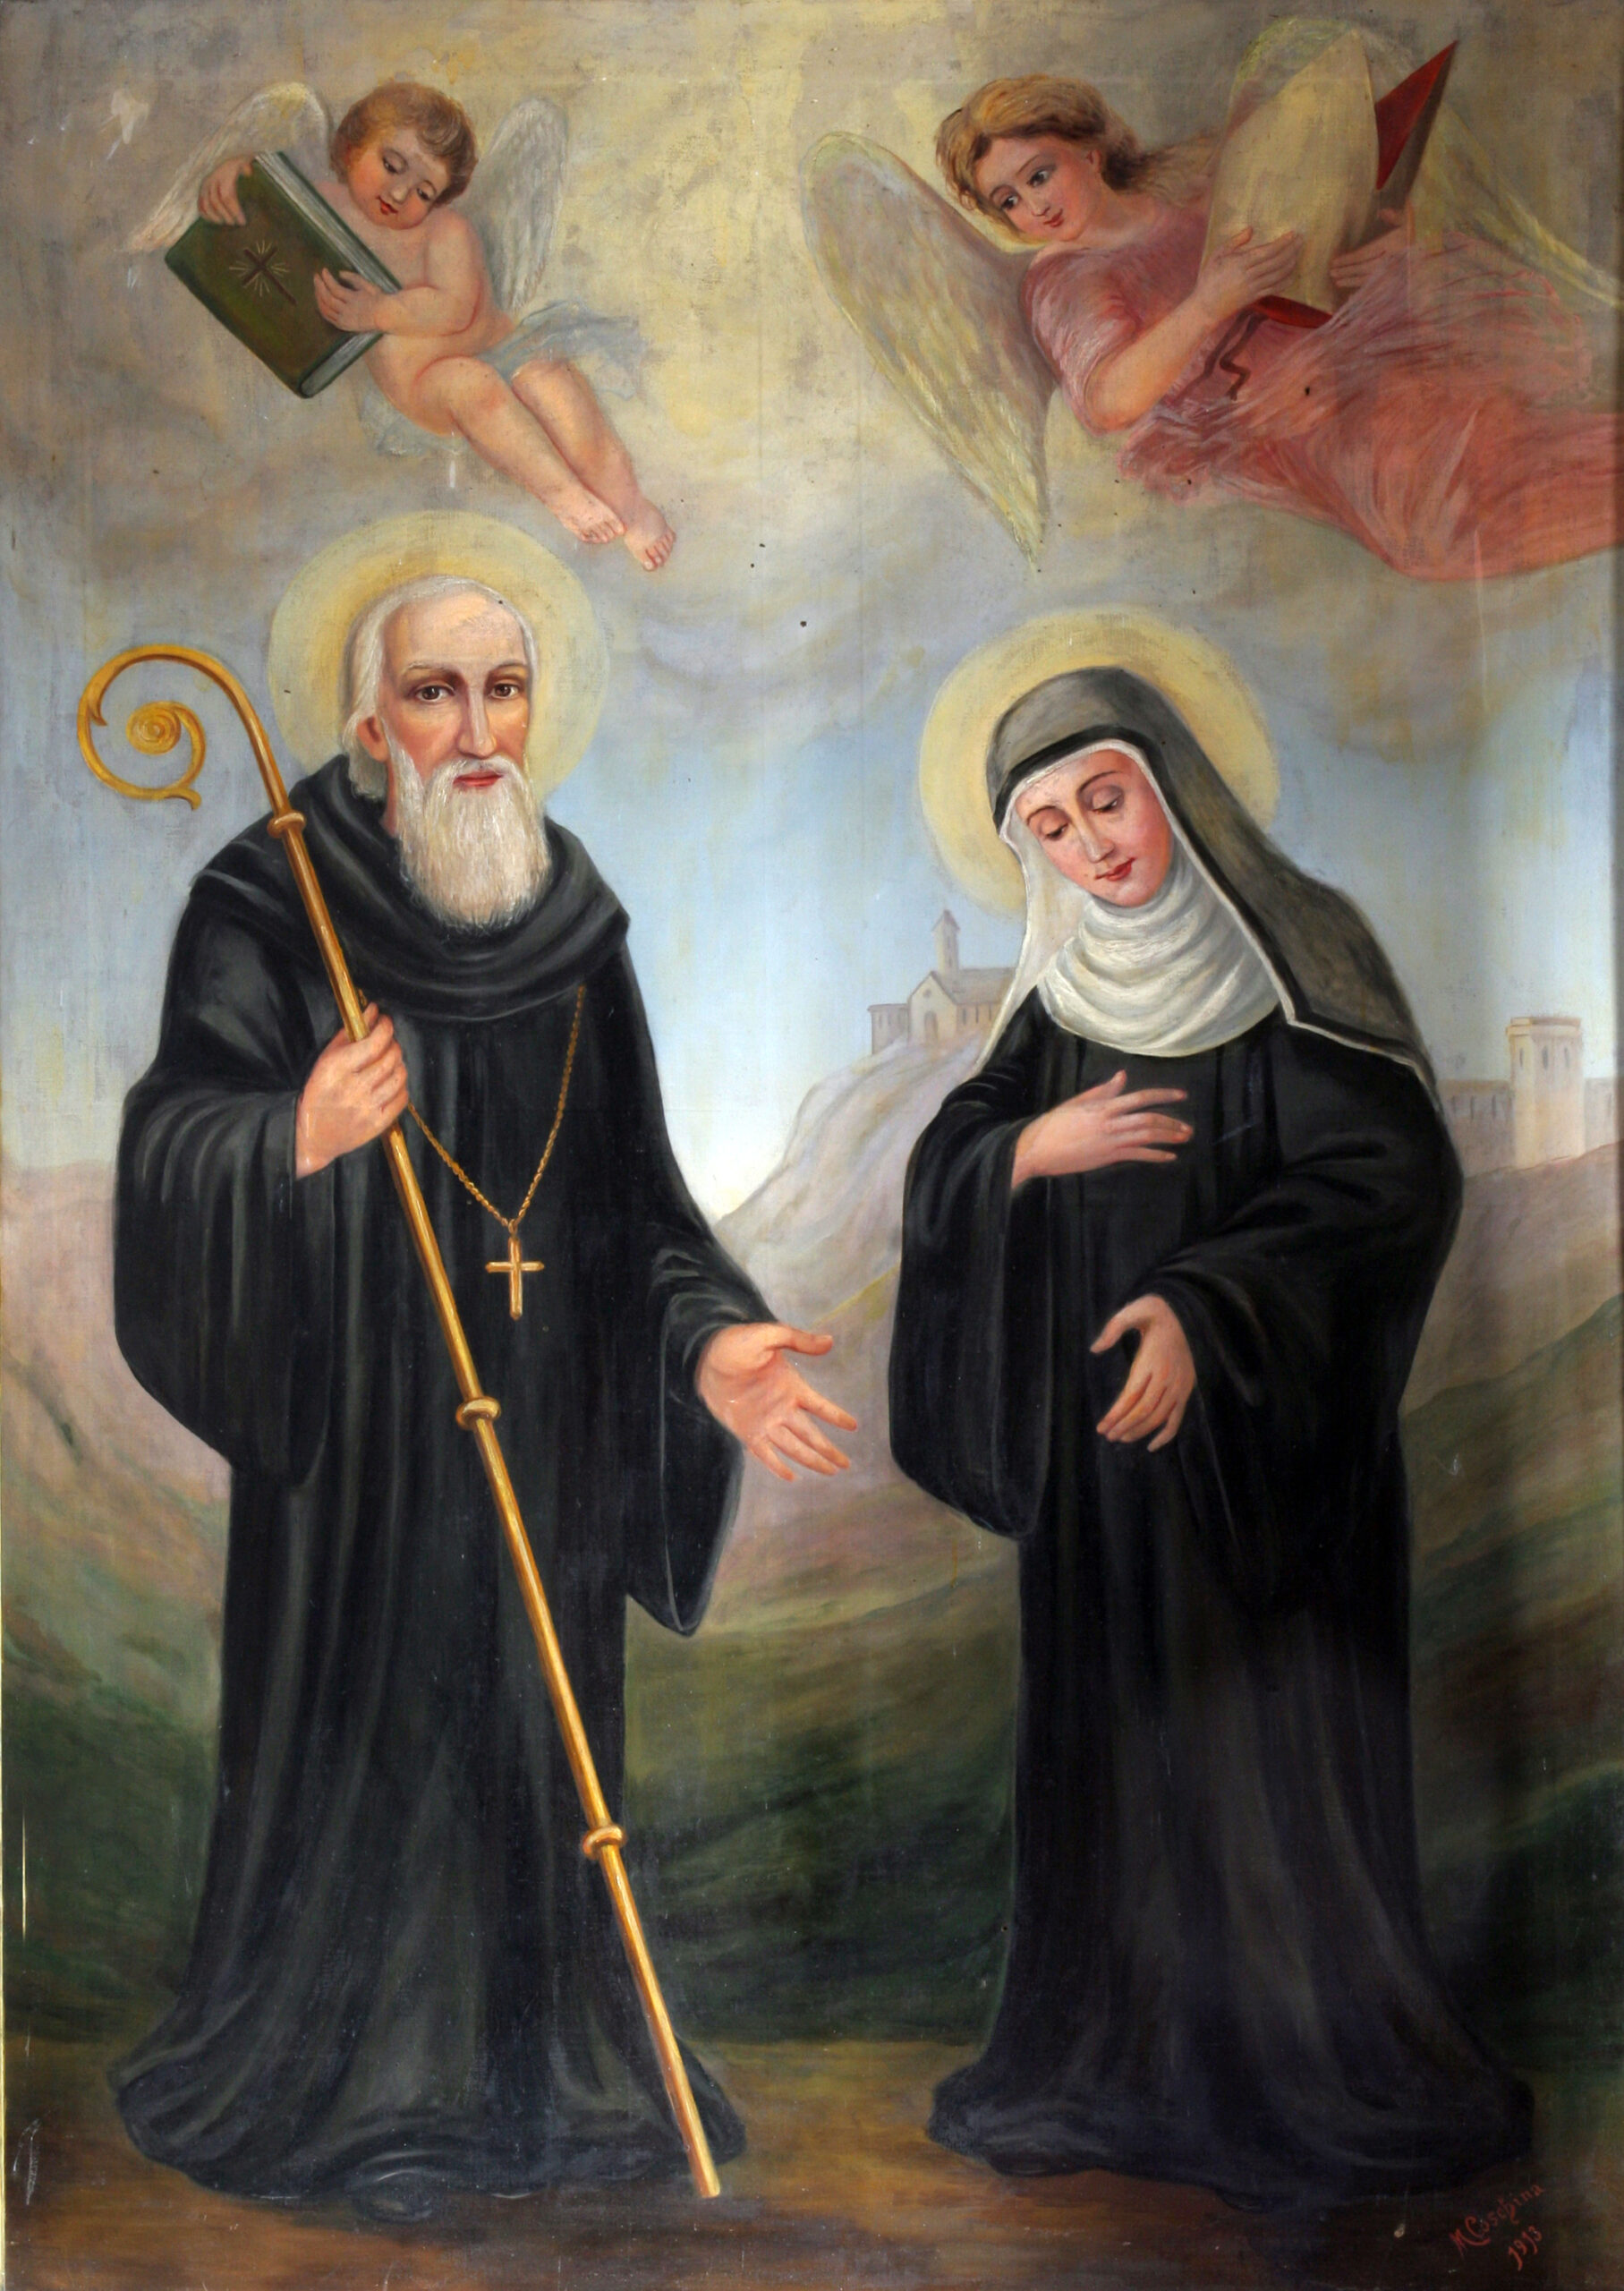 New Painted Works of St. Scholastica and St. Benedict ~ Liturgical Arts  Journal